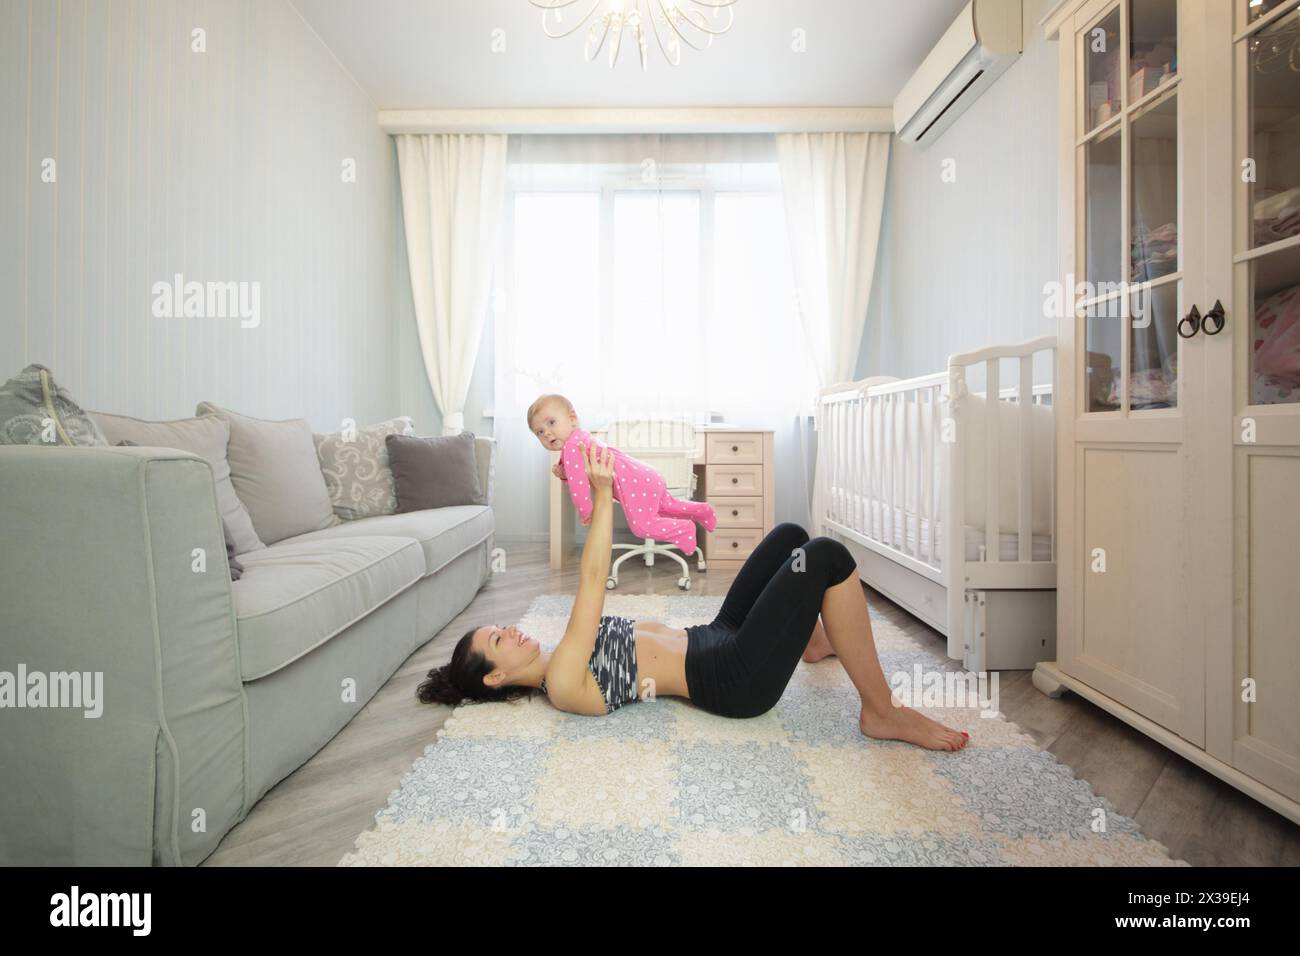 Happy woman lying on the floor on her back lifted up baby in the room Stock Photo